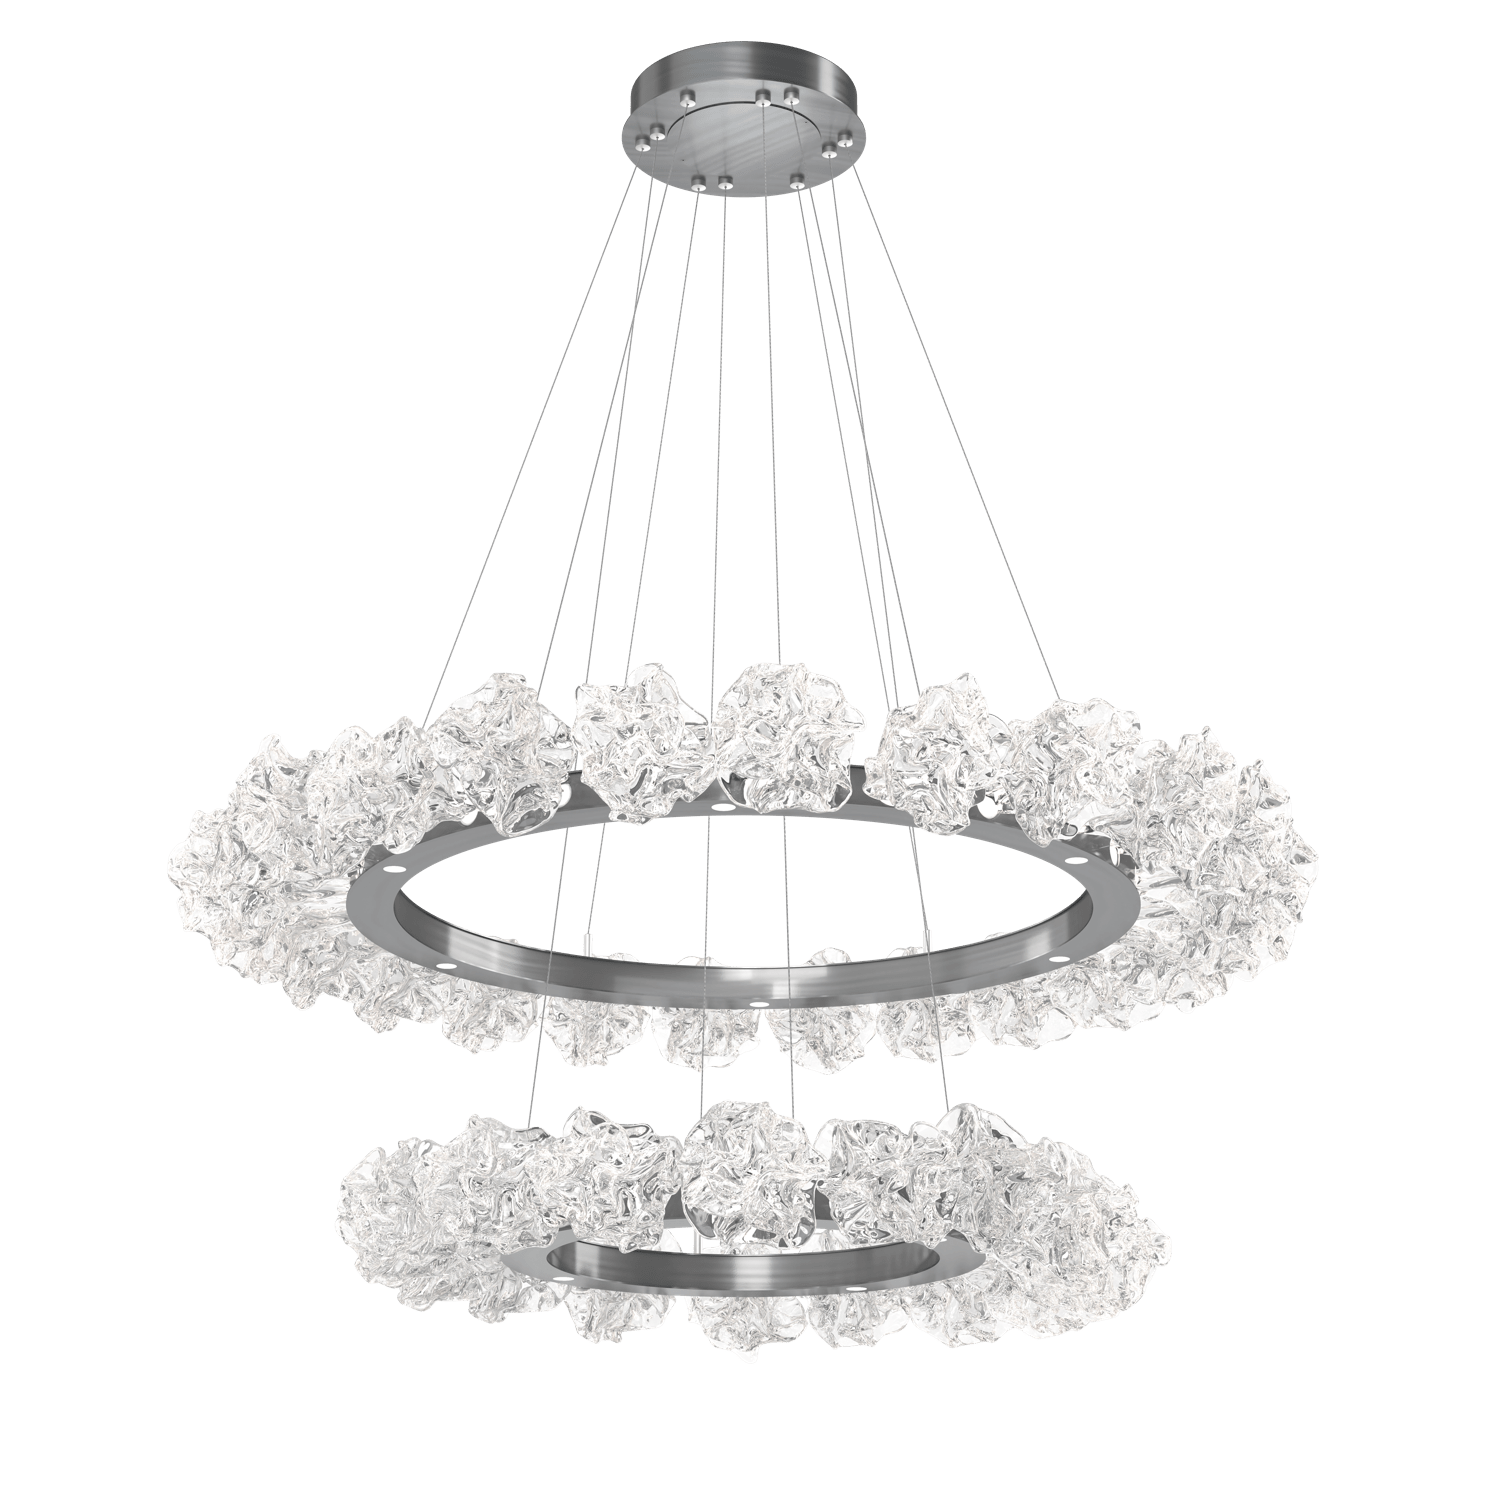 CHB0059-2B-GM-Hammerton-Studio-Blossom-50-inch-two-tier-radial-ring-chandelier-with-gunmetal-finish-and-clear-handblown-crystal-glass-shades-and-LED-lamping